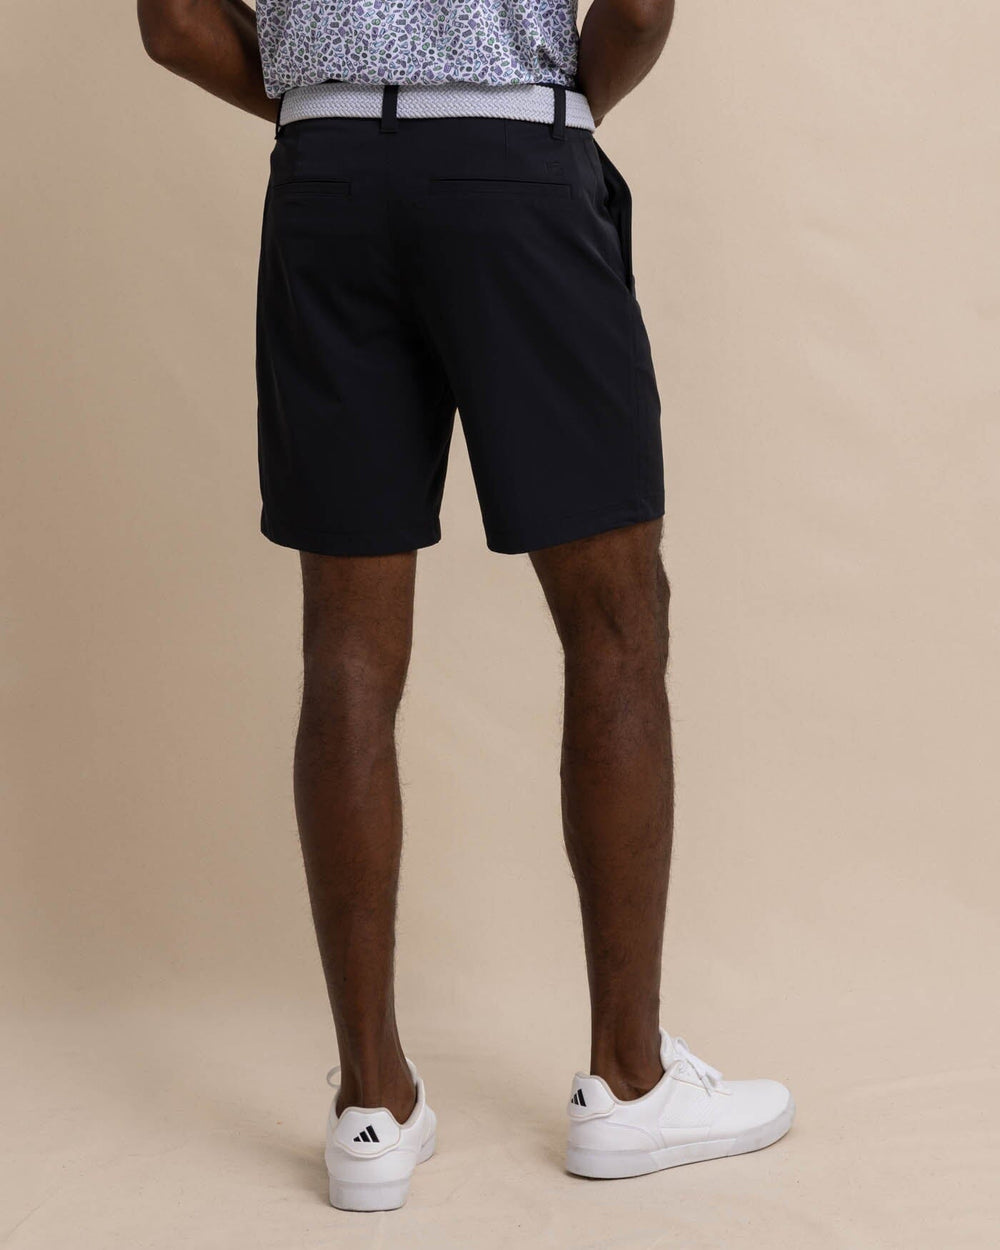 The back view of the Southern Tide gulf-8-inch-brrr-die-performance-short by Southern Tide - Caviar Black